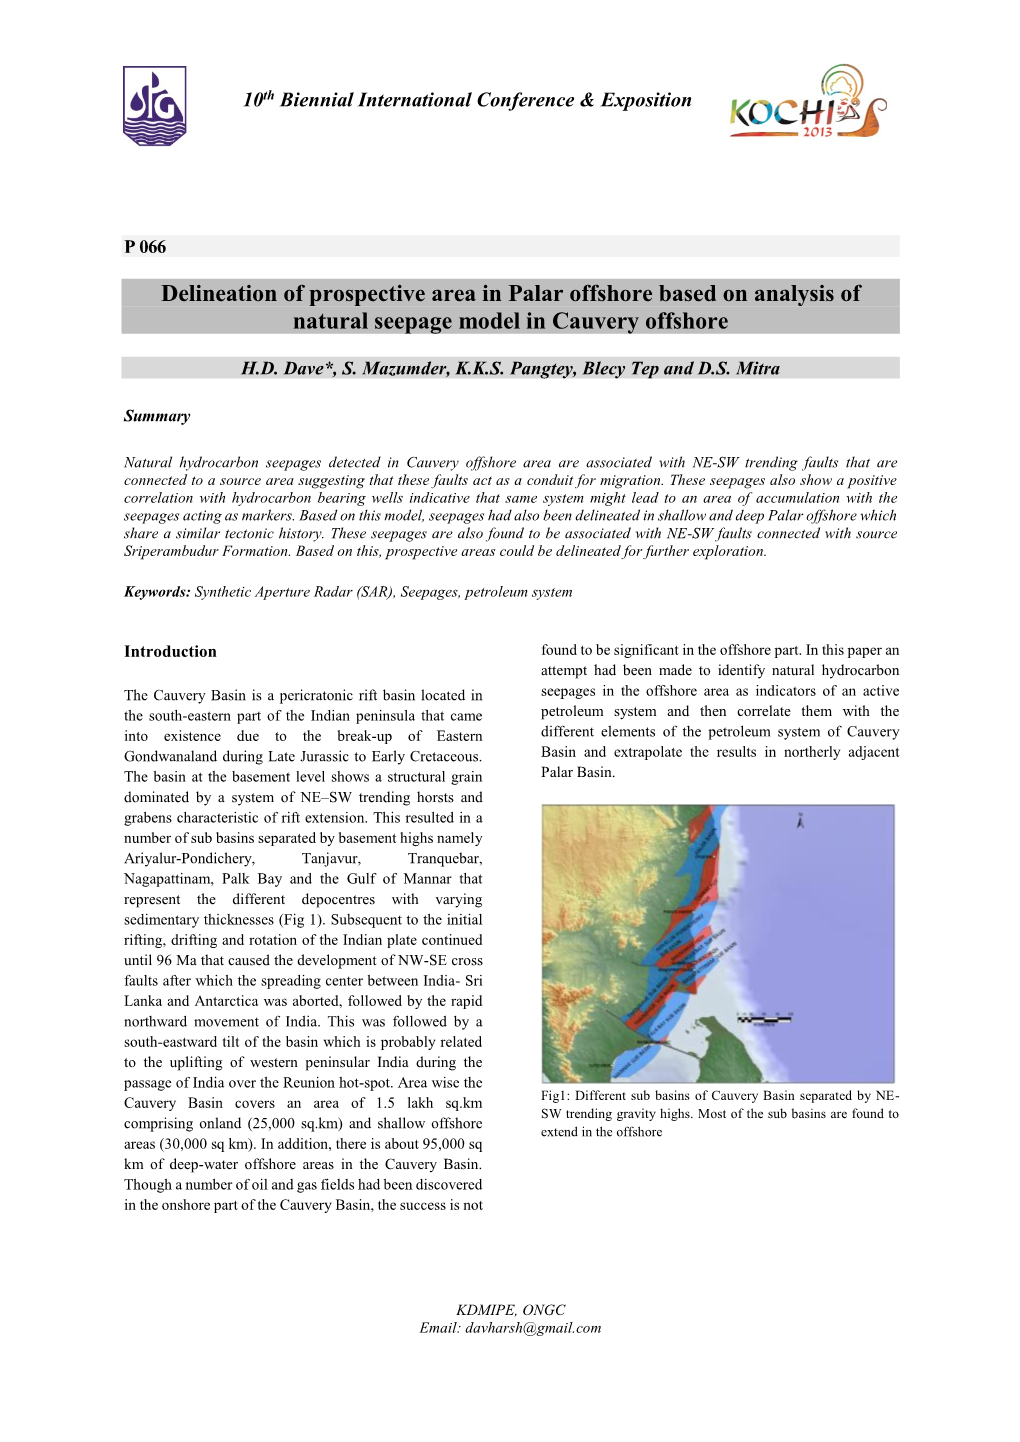 Delineation of Prospective Area in Palar Offshore Based on Analysis of Natural Seepage Model in Cauvery Offshore